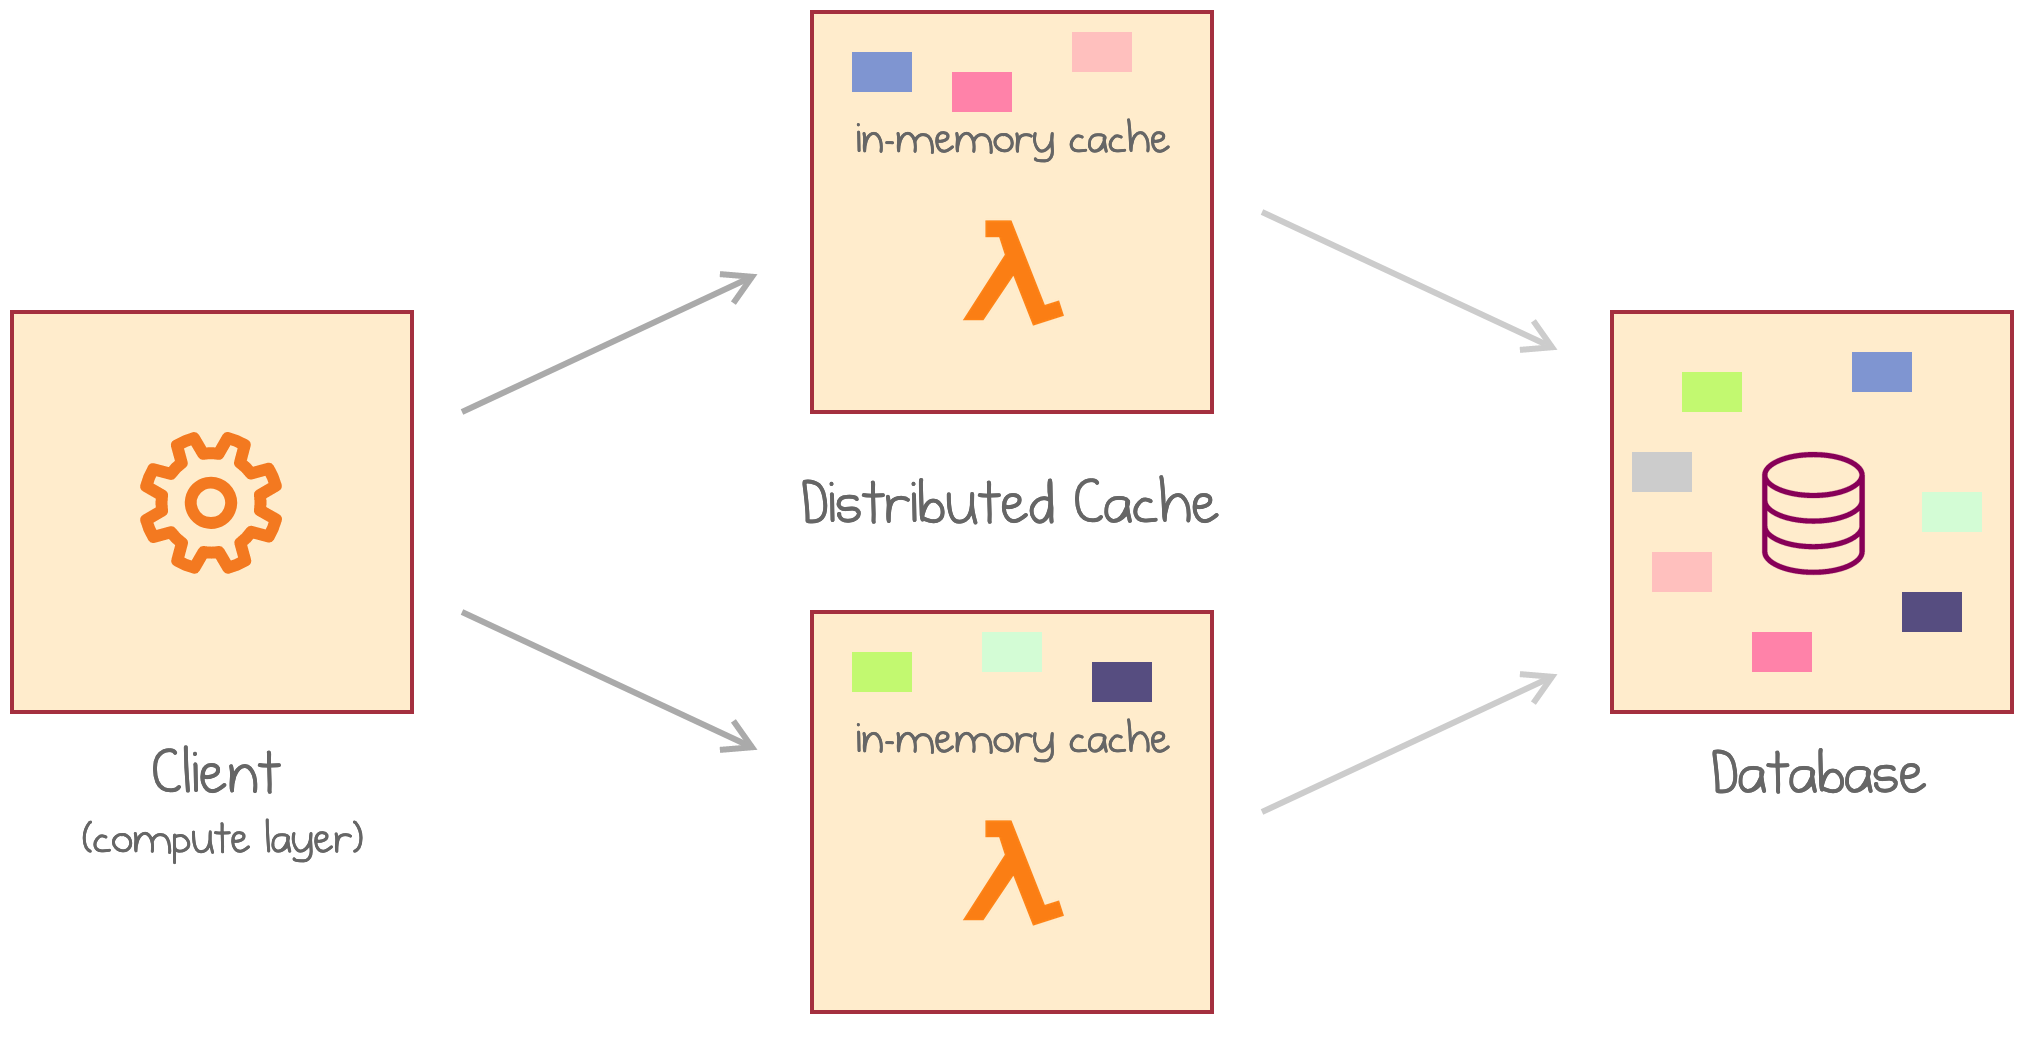 Application loads data from a distributed cache of multiple AWS Lambdas